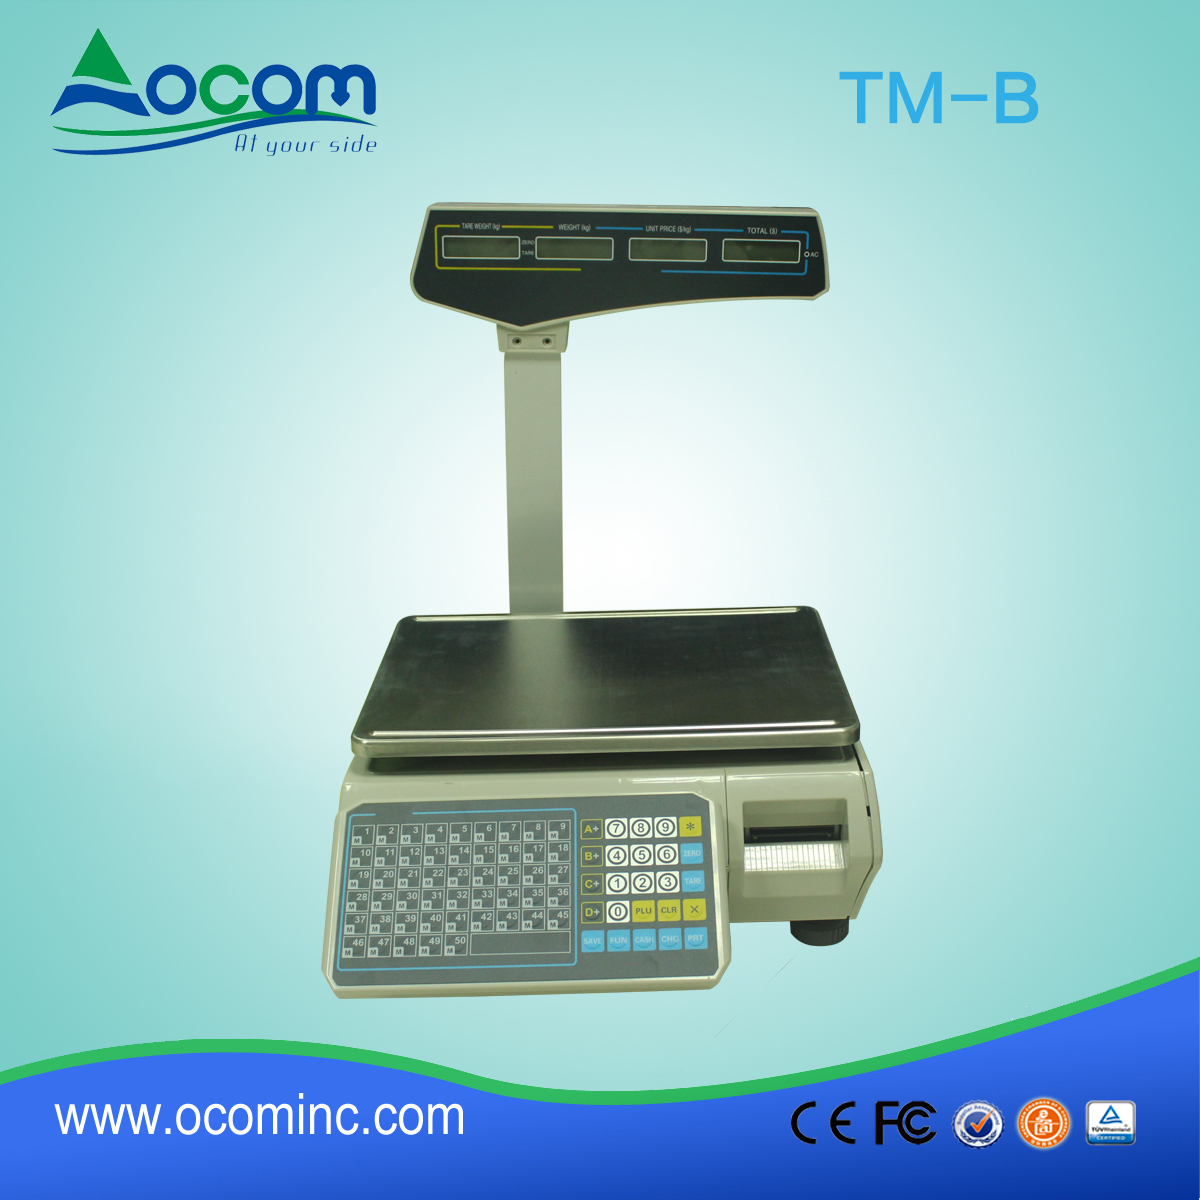 TM-B 30kg Electronic Weighing Scale with Label Printer and Lan Interface